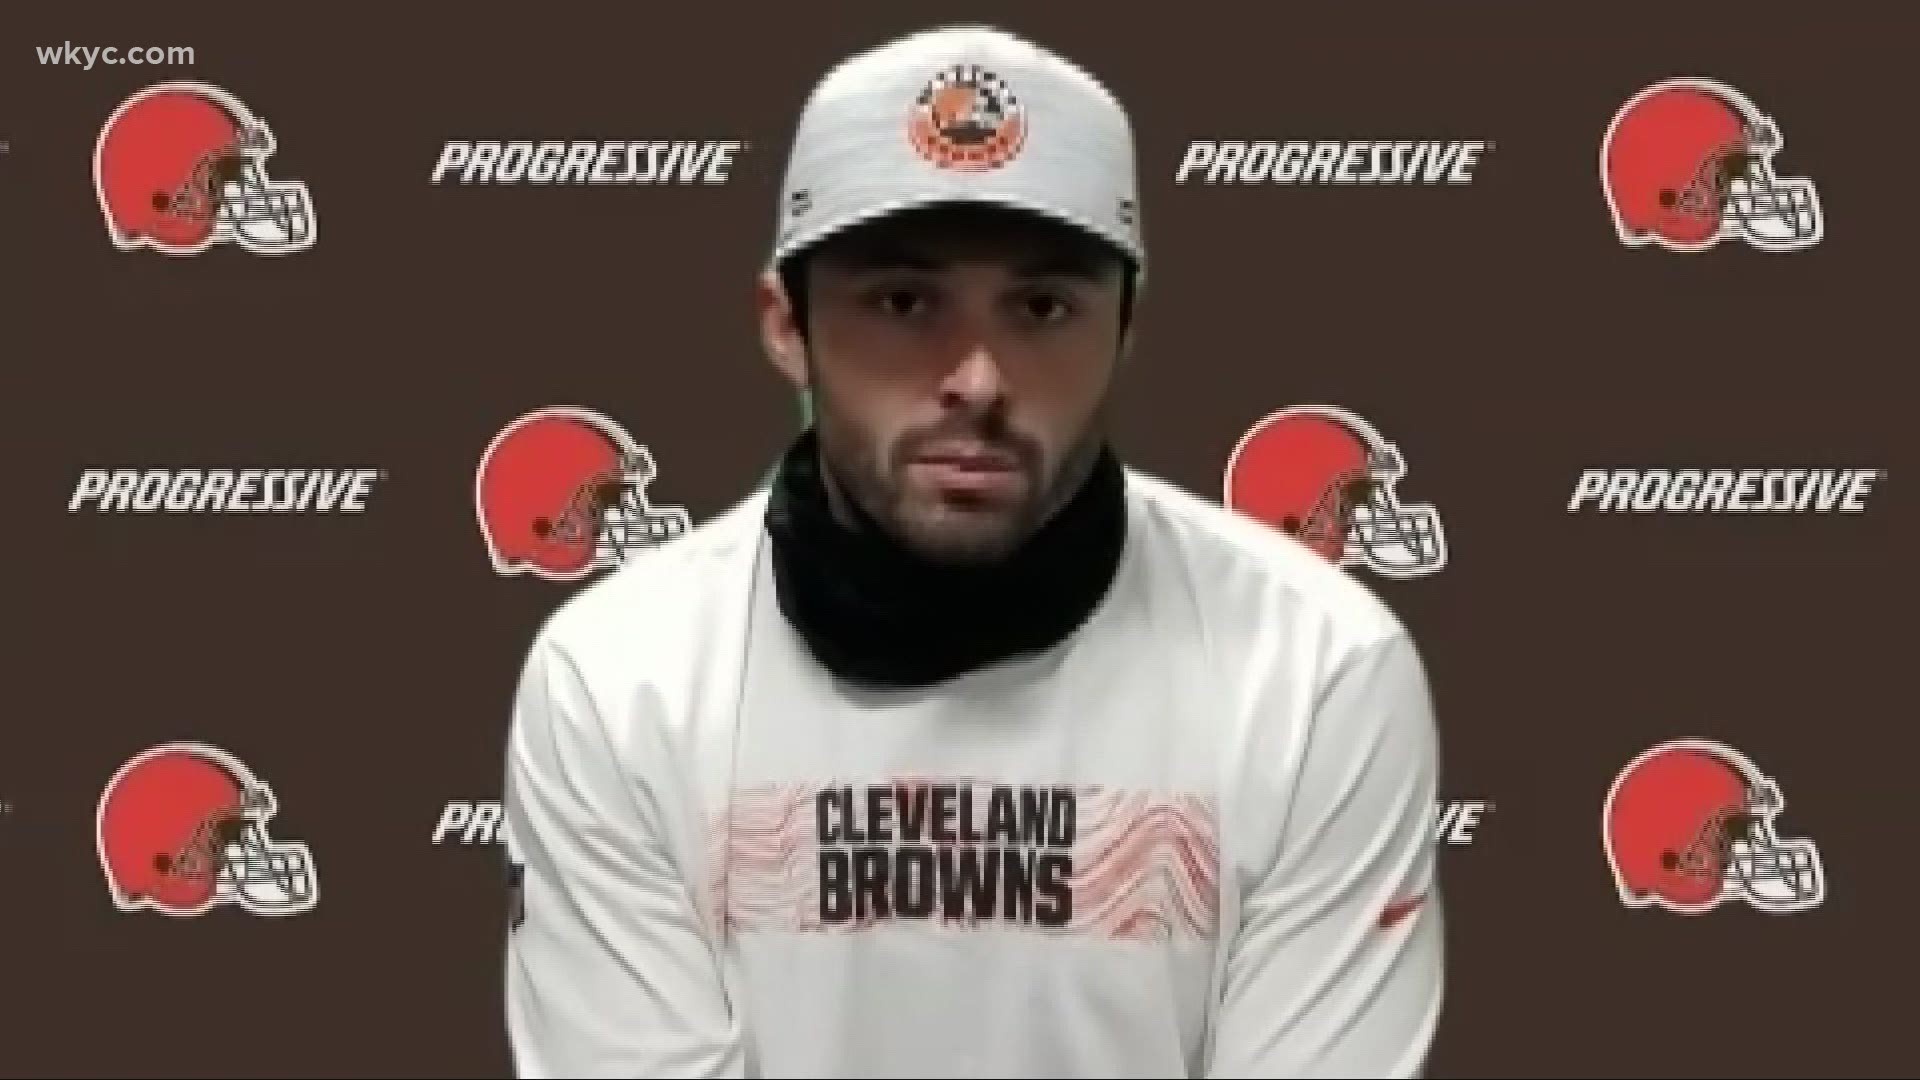 Cleveland Browns quarterback Baker Mayfield said on Wednesday that he's in no rush to sign a long-term contract extension. Jimmy Donovan has the details.